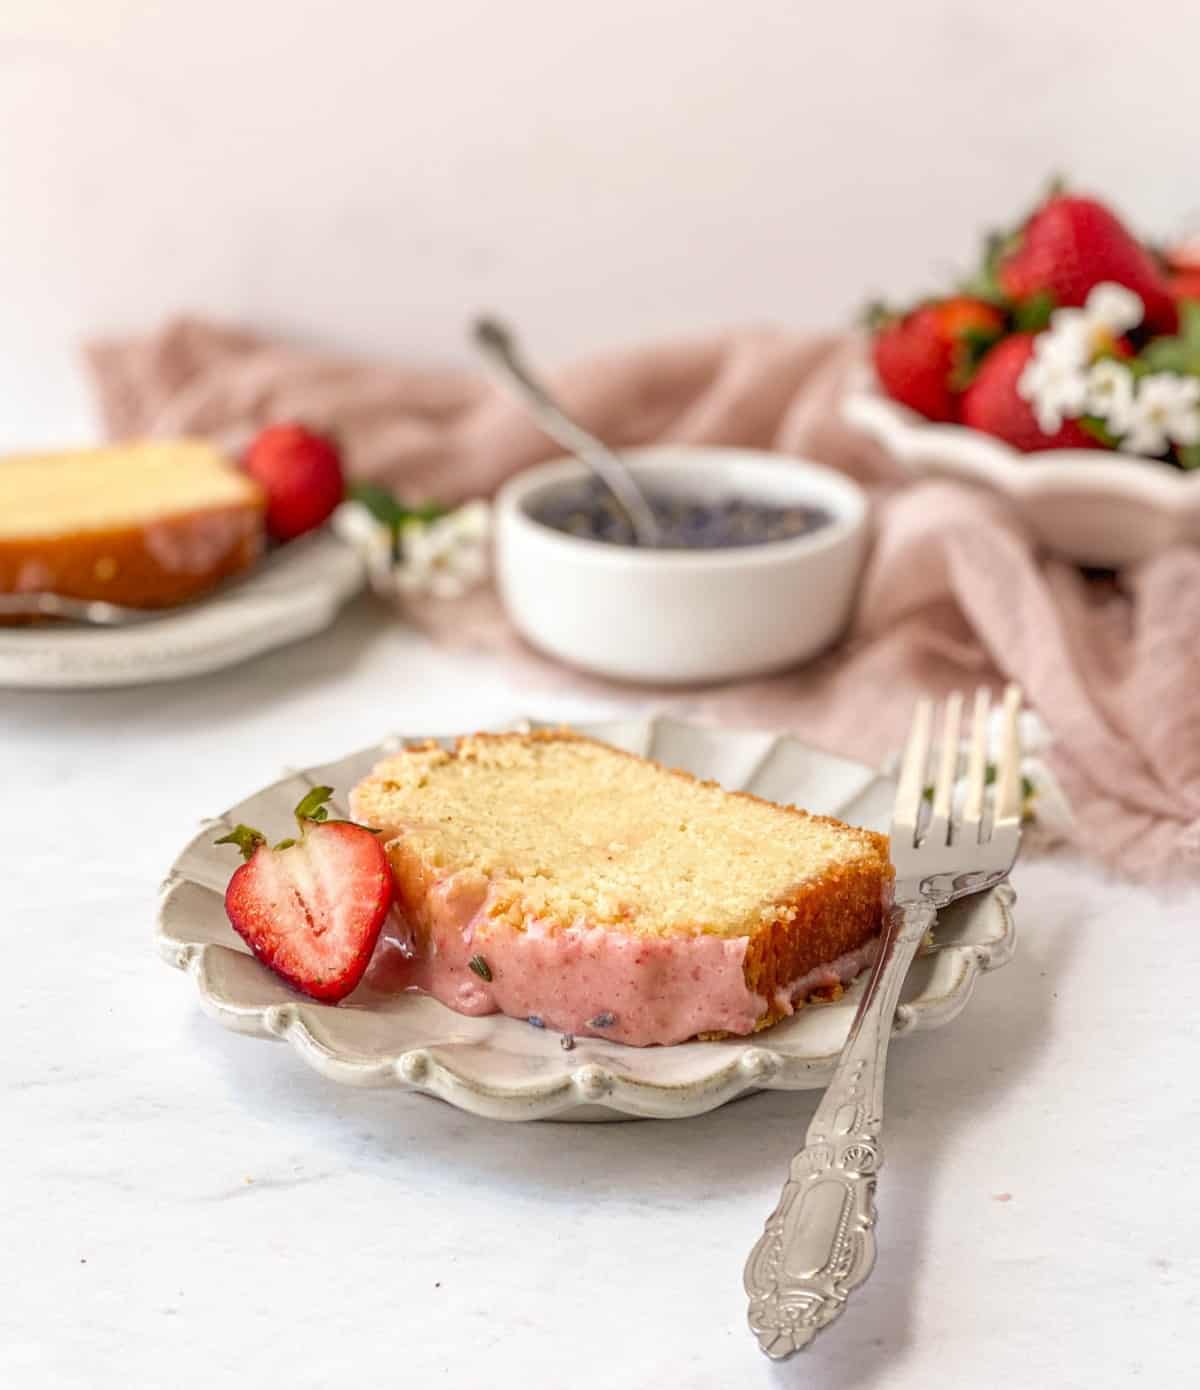 Slice of Lavender Pound Cake with Strawberry Glaze on a fluted plate with a silver fork.